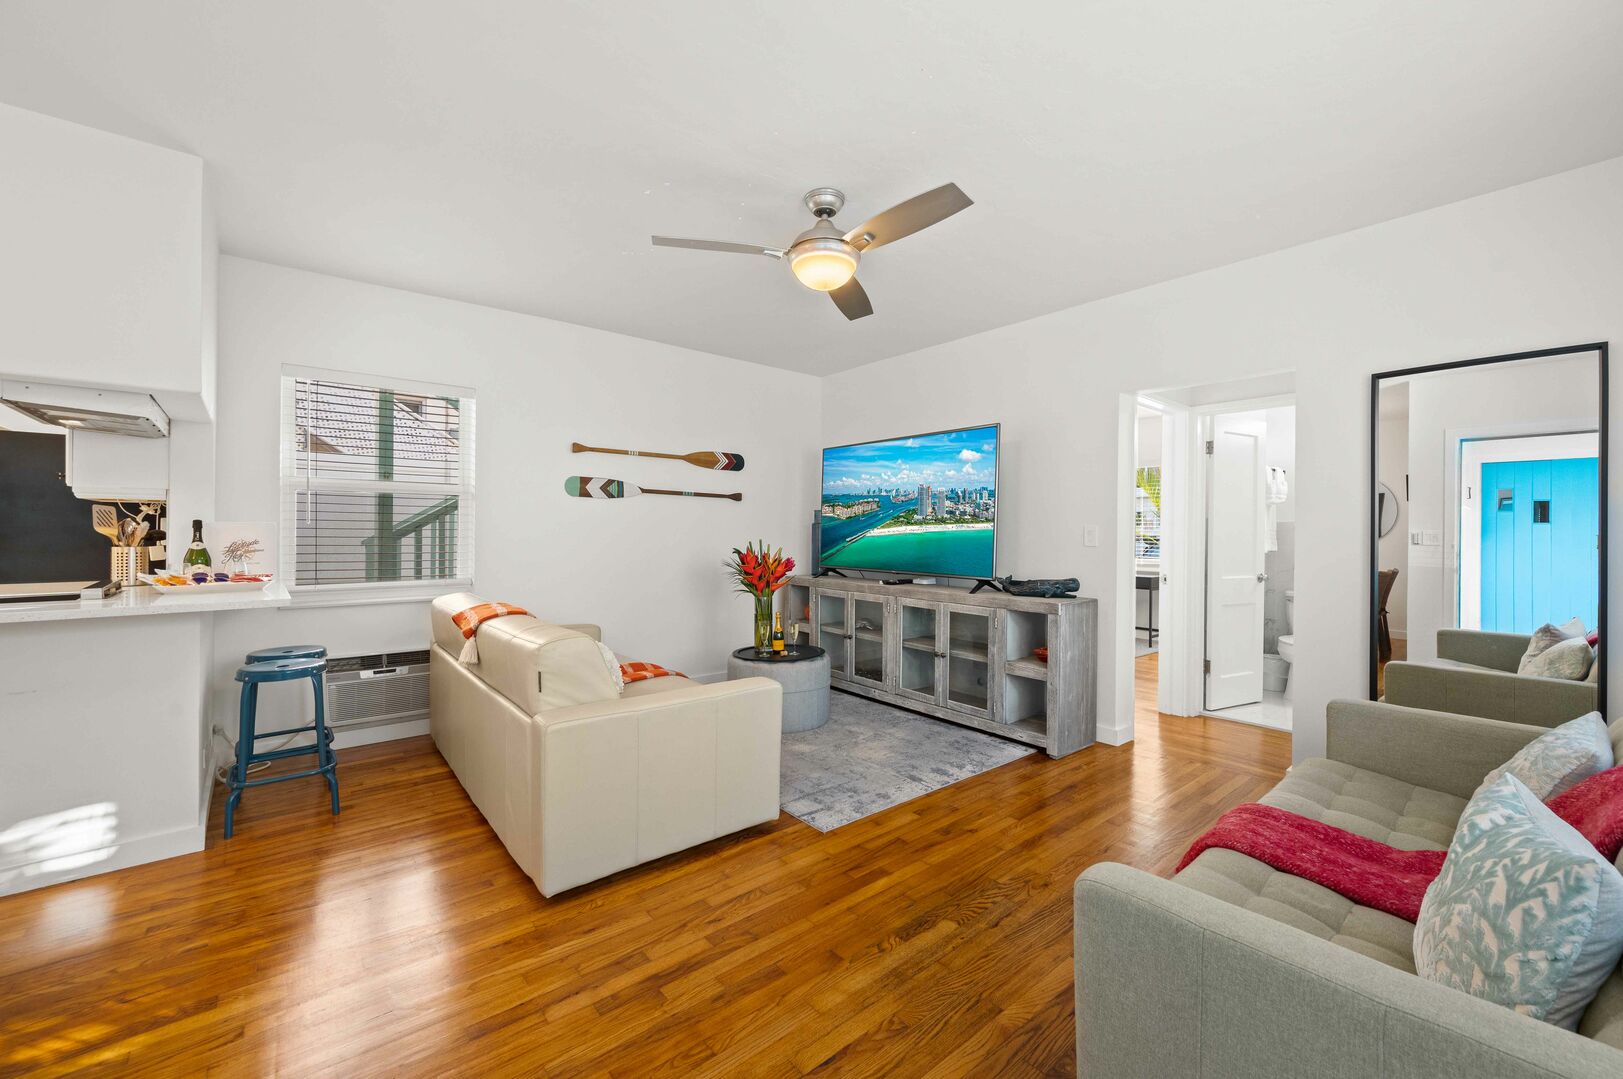 Cozy two bedroom apartment just steps away from the beach and water taxi on the Intracoastal Waterway.